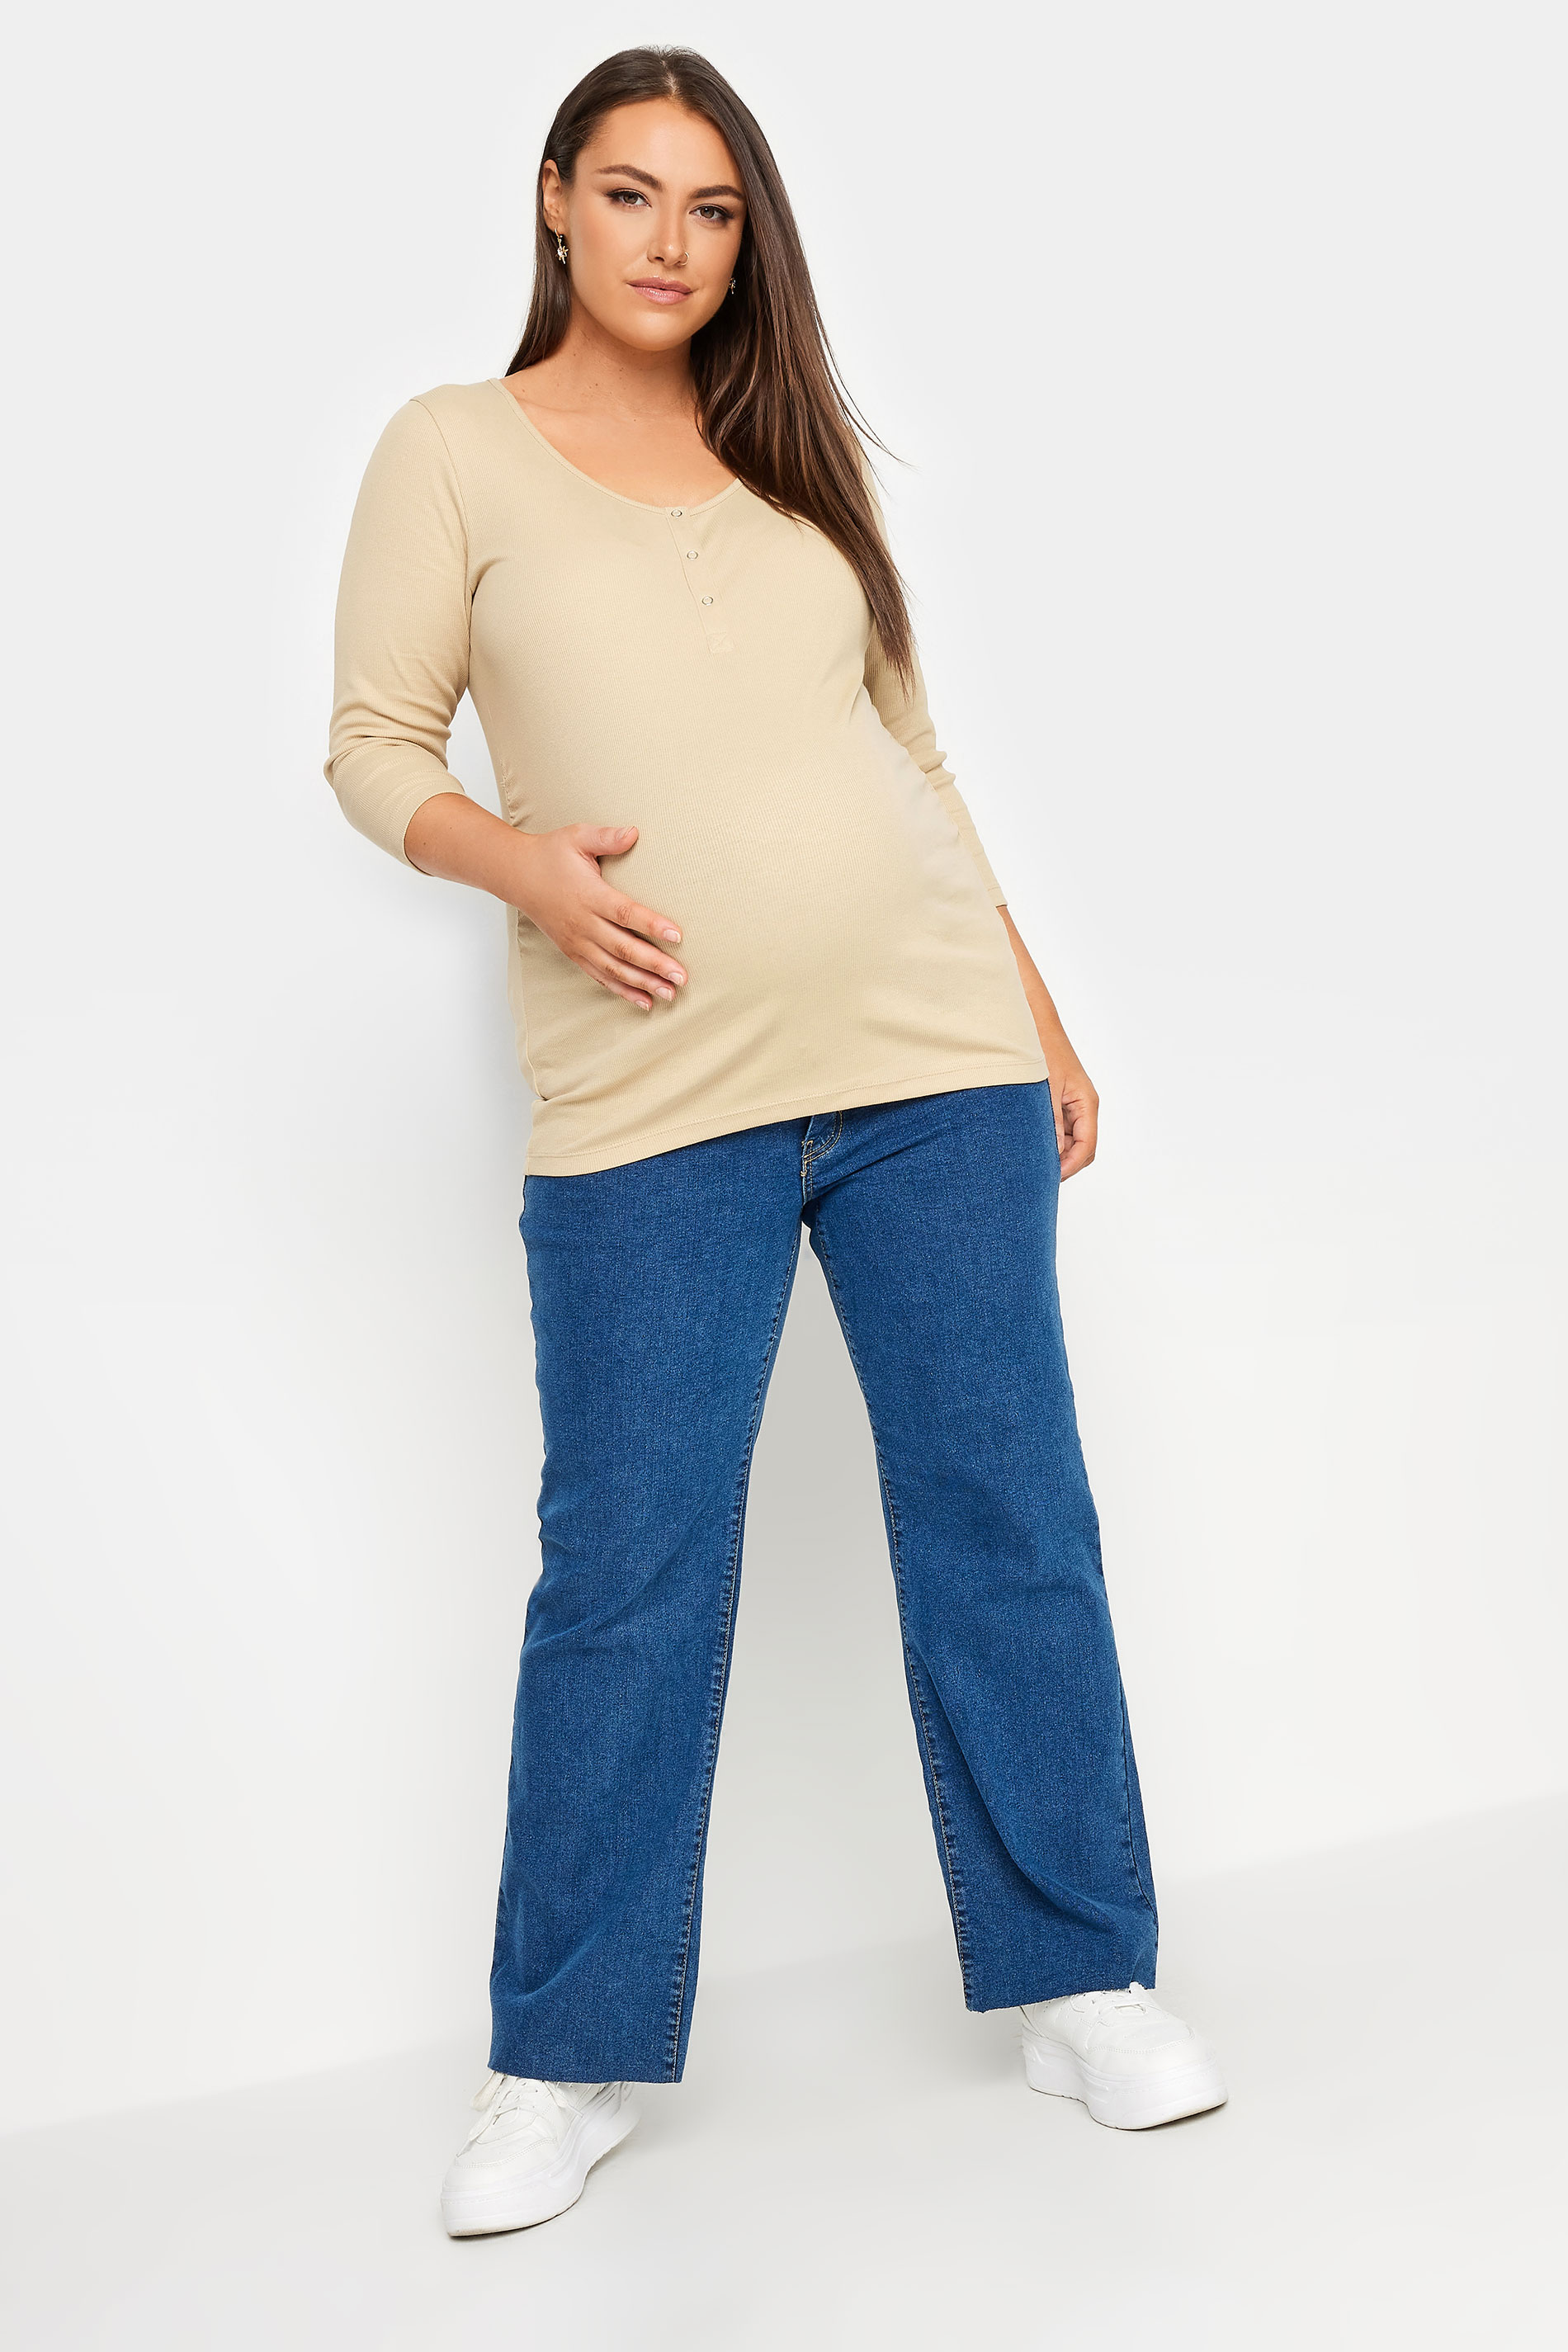 BUMP IT UP MATERNITY Plus Size Beige Brown Ribbed Popper Fastening Top | Yours Clothing 2